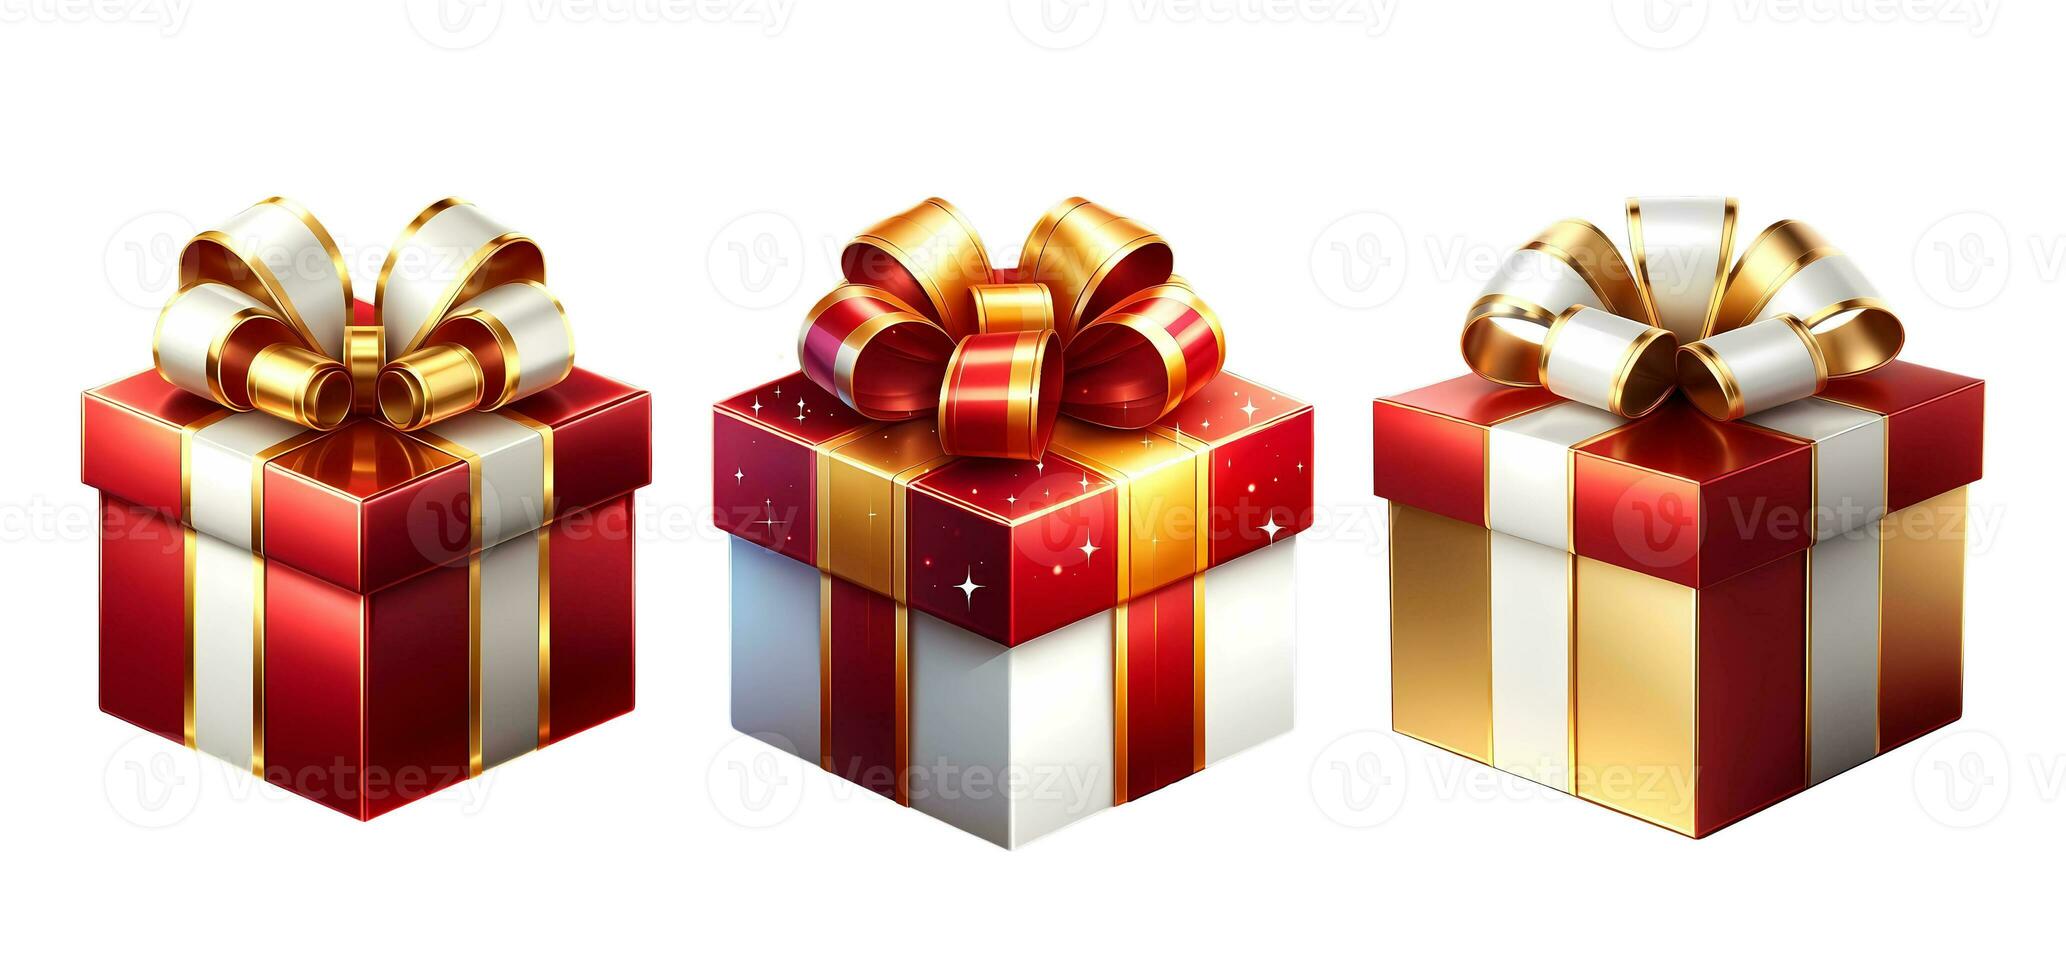 3 Gift box illustration red and gold color isolated on white background photo